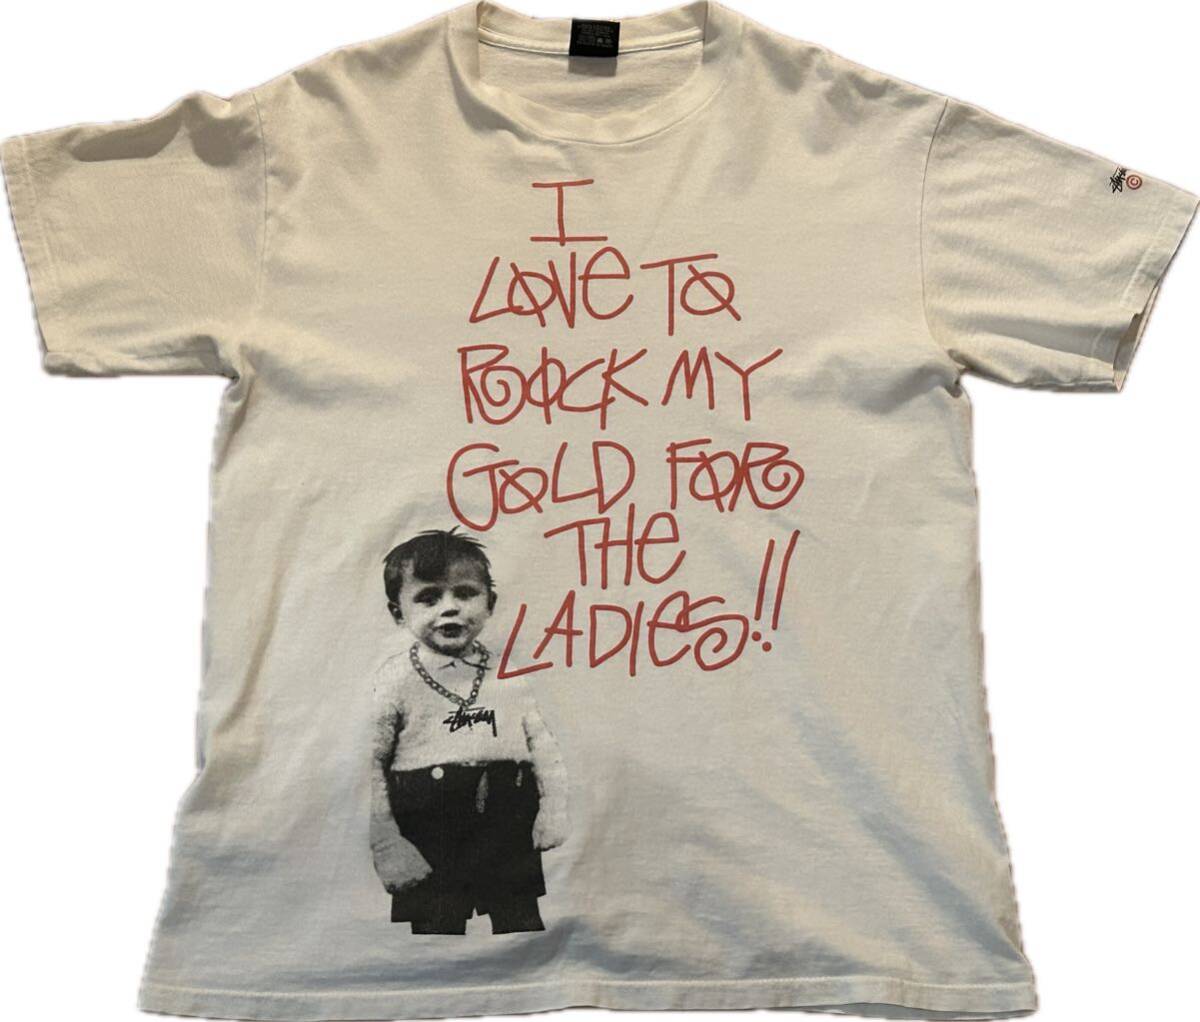 USA製 00s Old Stussy I LOVE TO ROCK MY GOLD FOR THE LADIES Tee Shirt オールドステューシー フォトプリント Tシャツ Vintageビンテージ_画像1